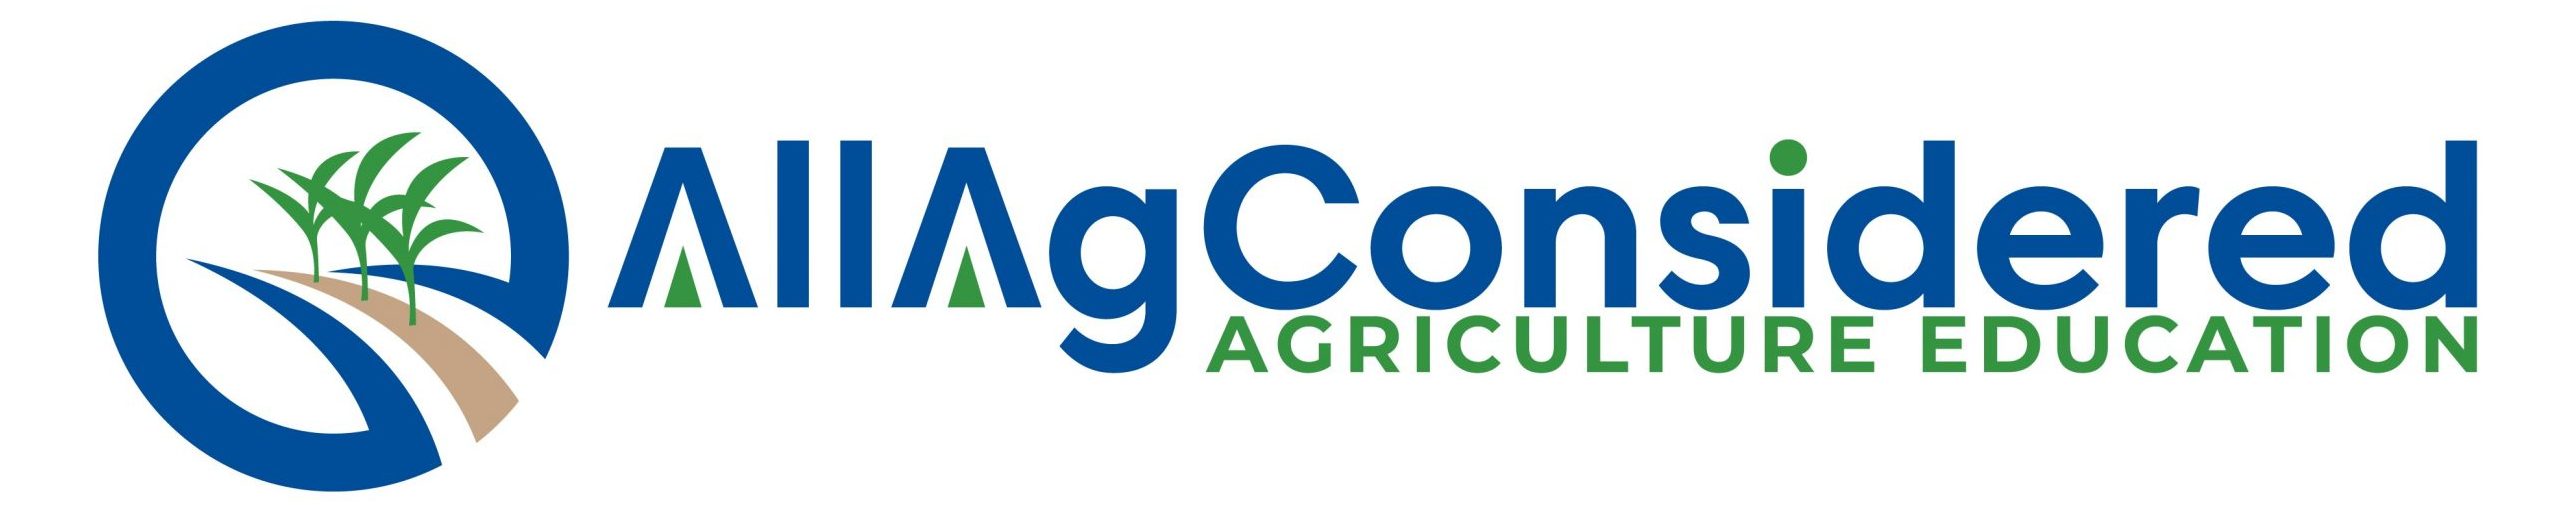 AllAgConsidered Agriculture Education